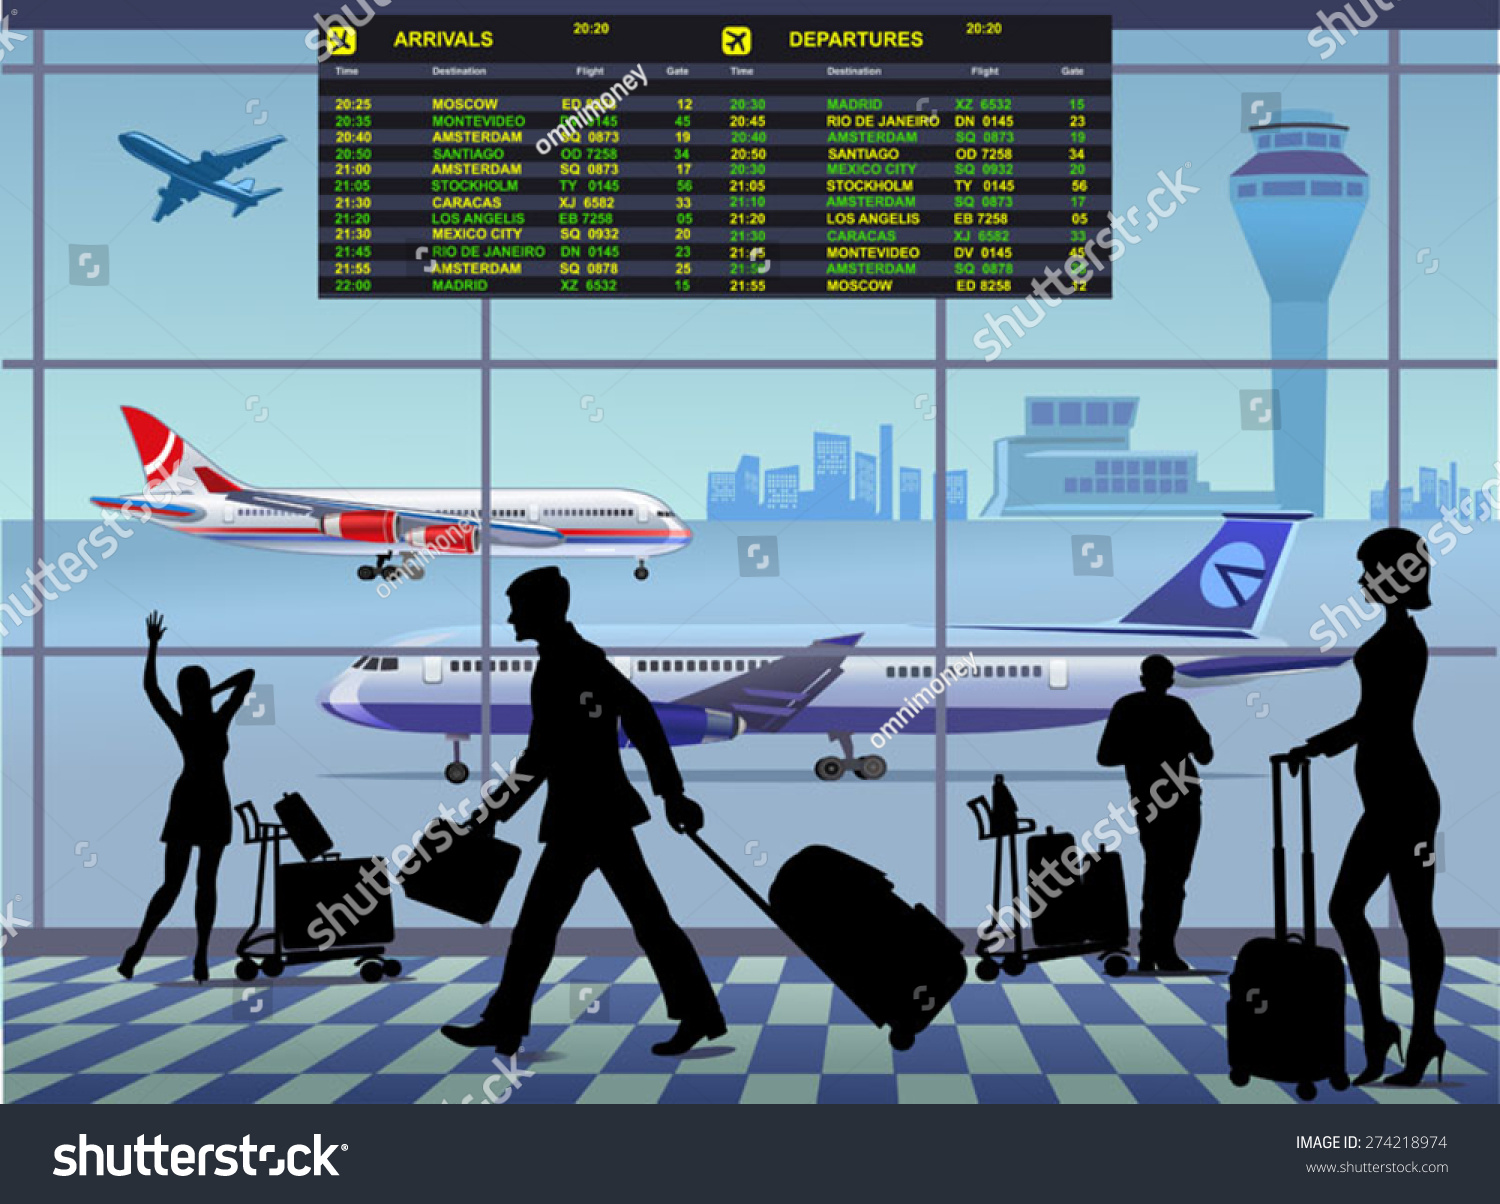 airport safety clipart - photo #49